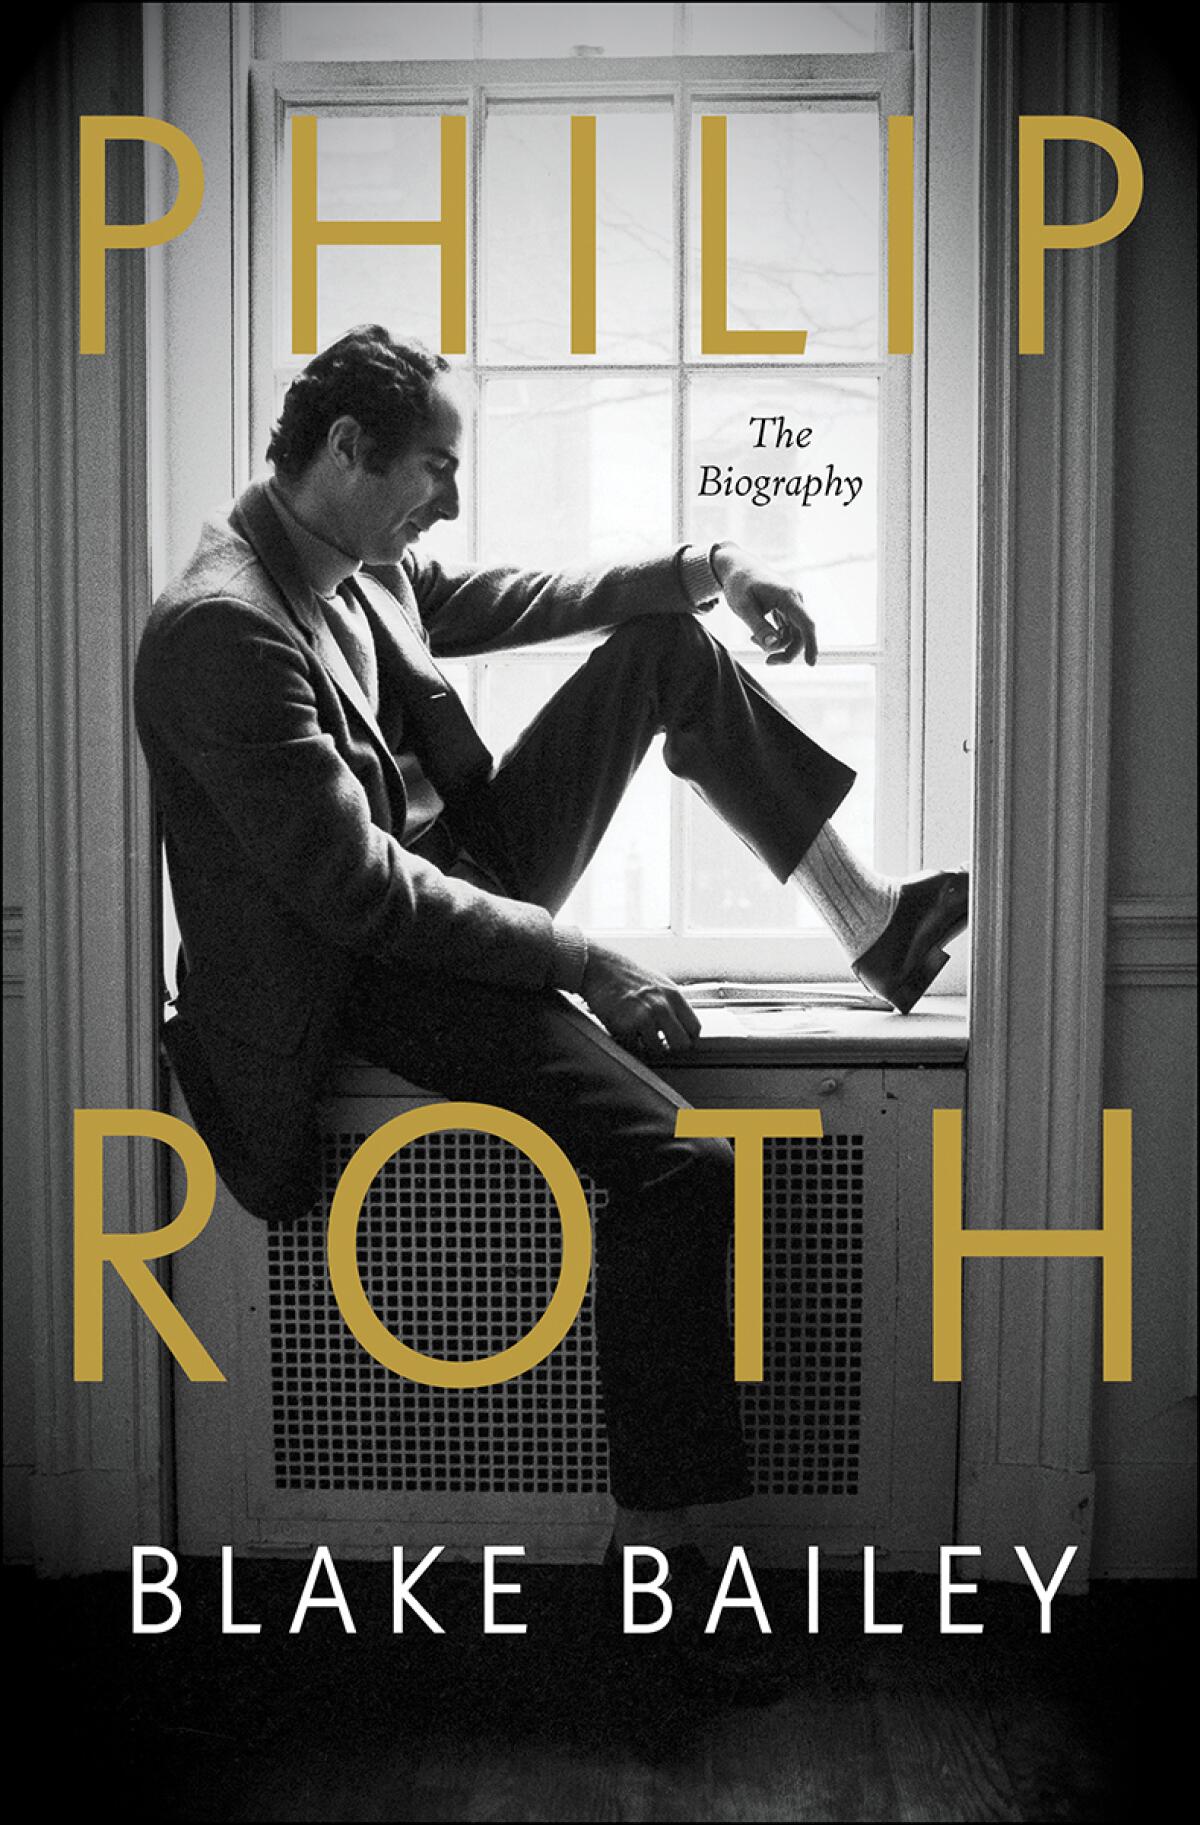 The book jacket cover of Blake Bailey's "Philip Roth: The Biography"